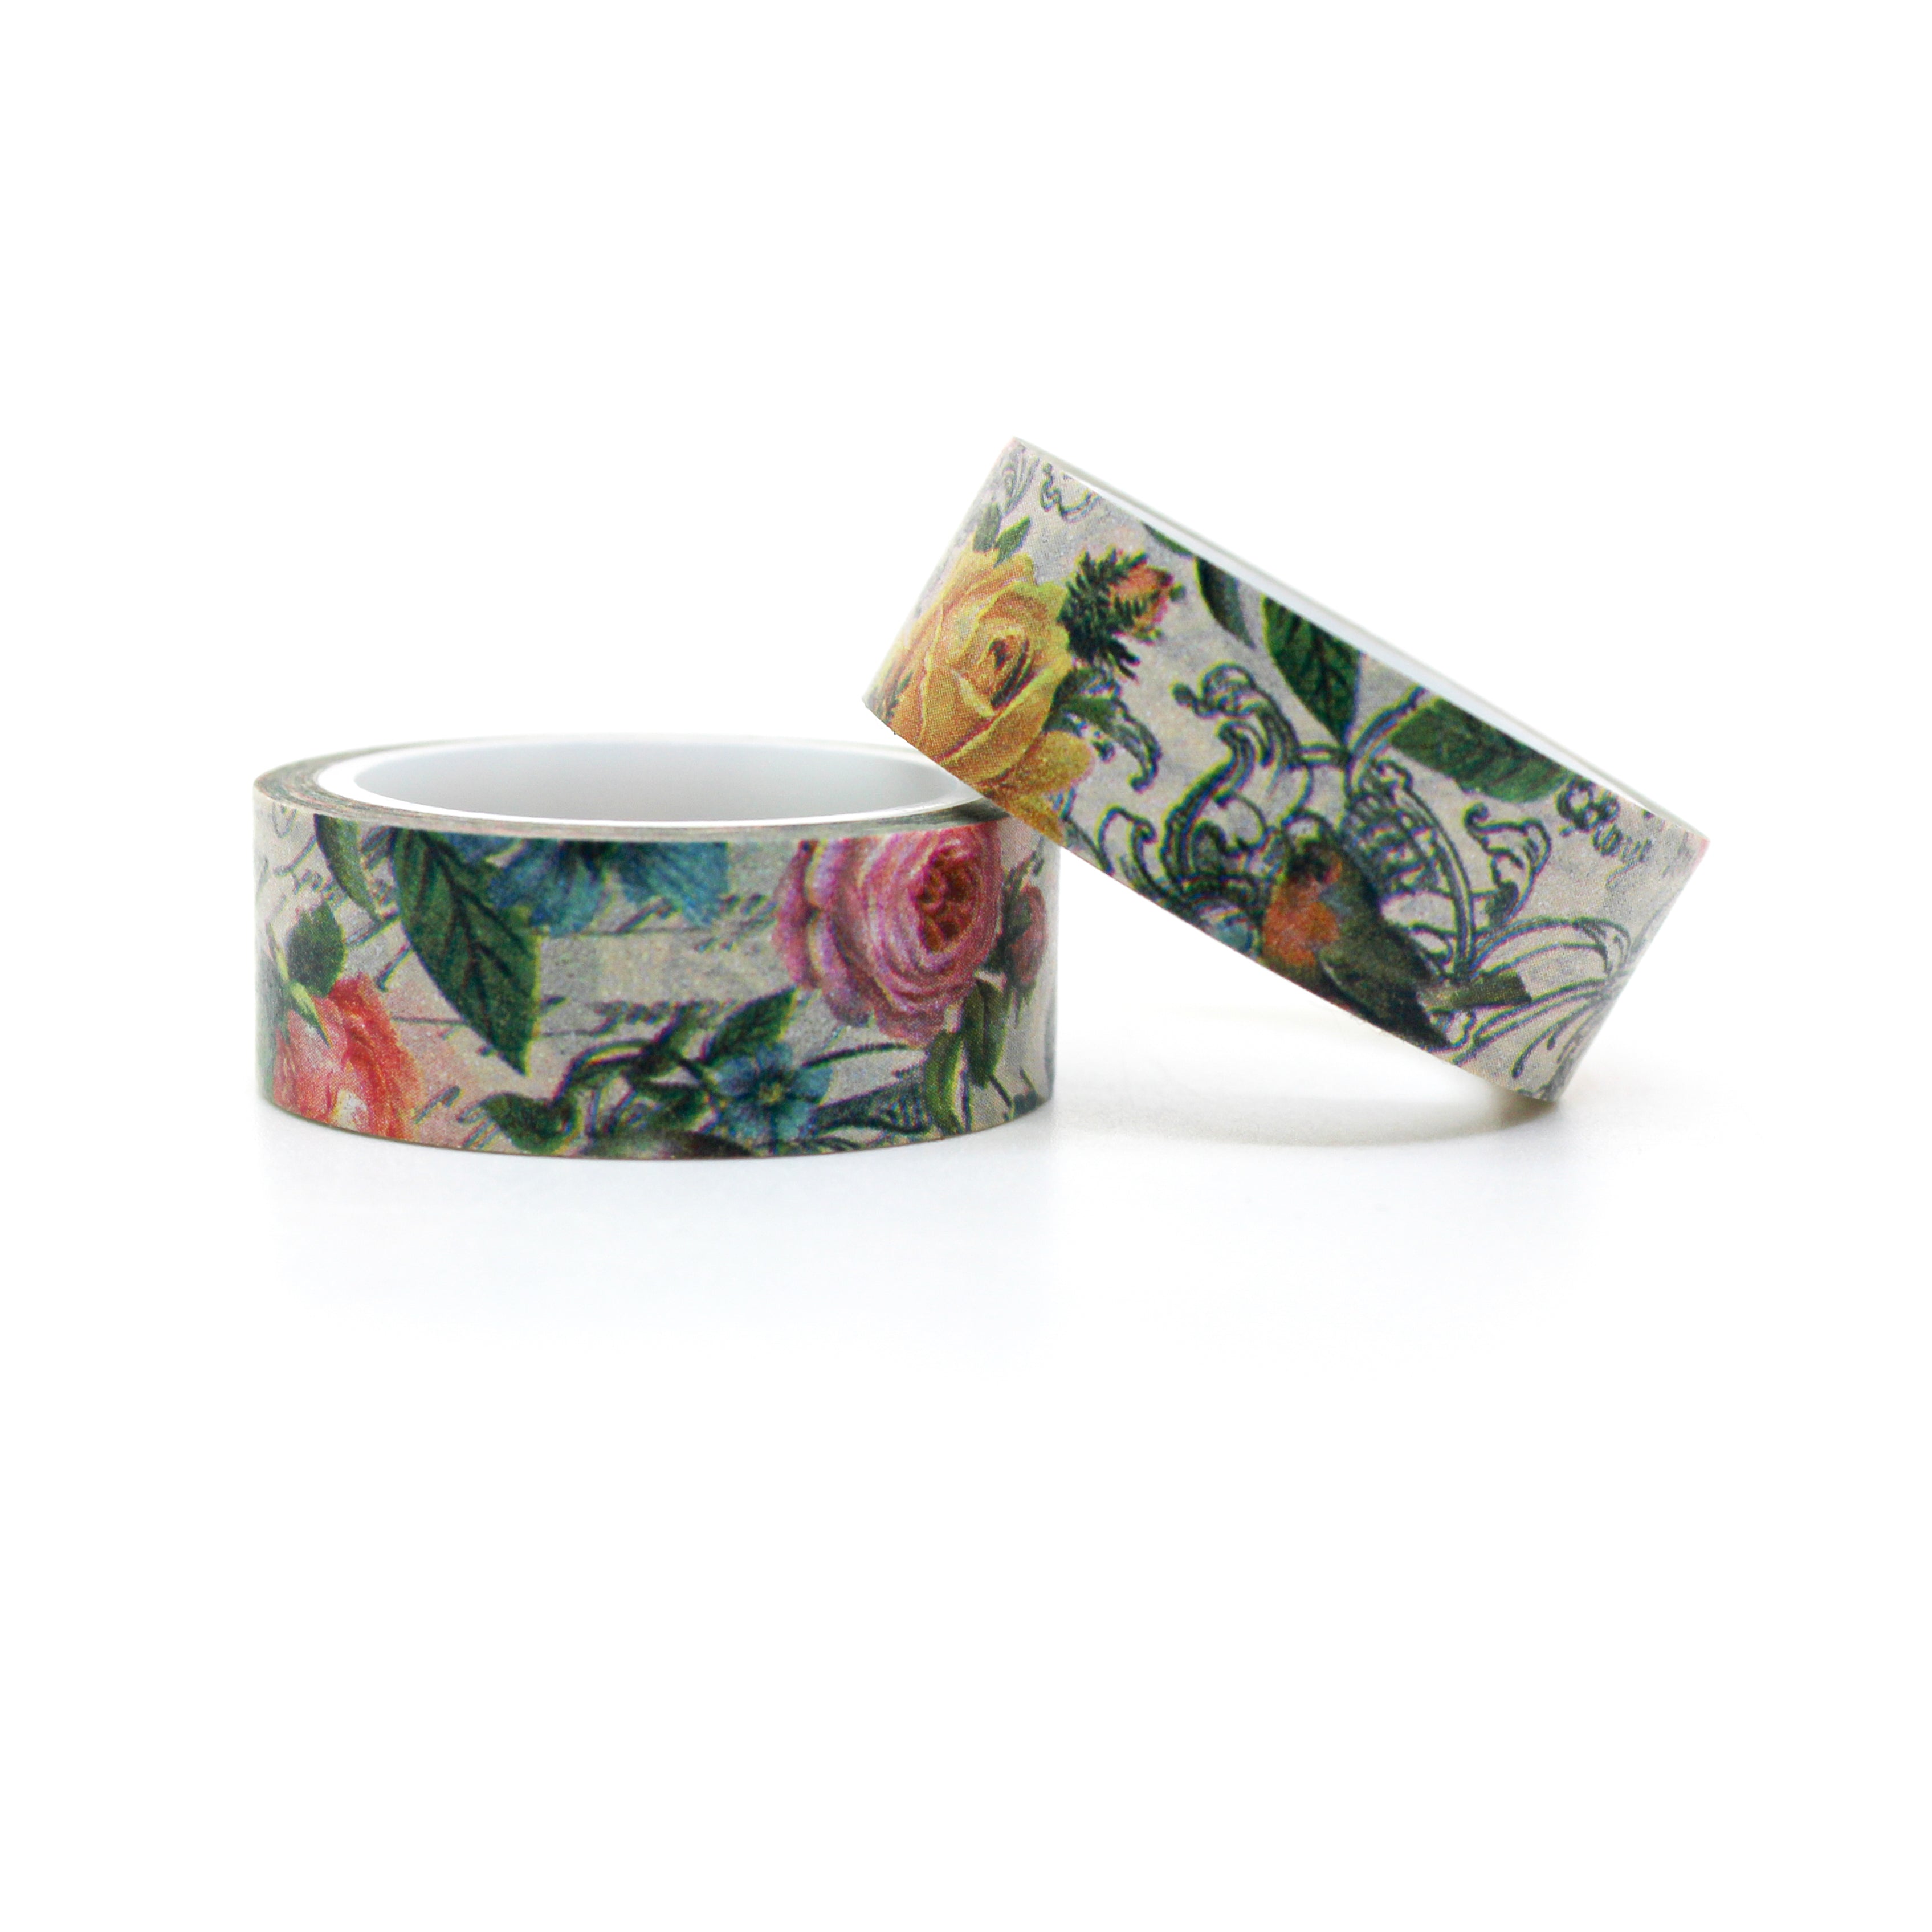 This is a roll of yellow and pink style of rose flowers washi tape from BBB Supplies Craft Shop